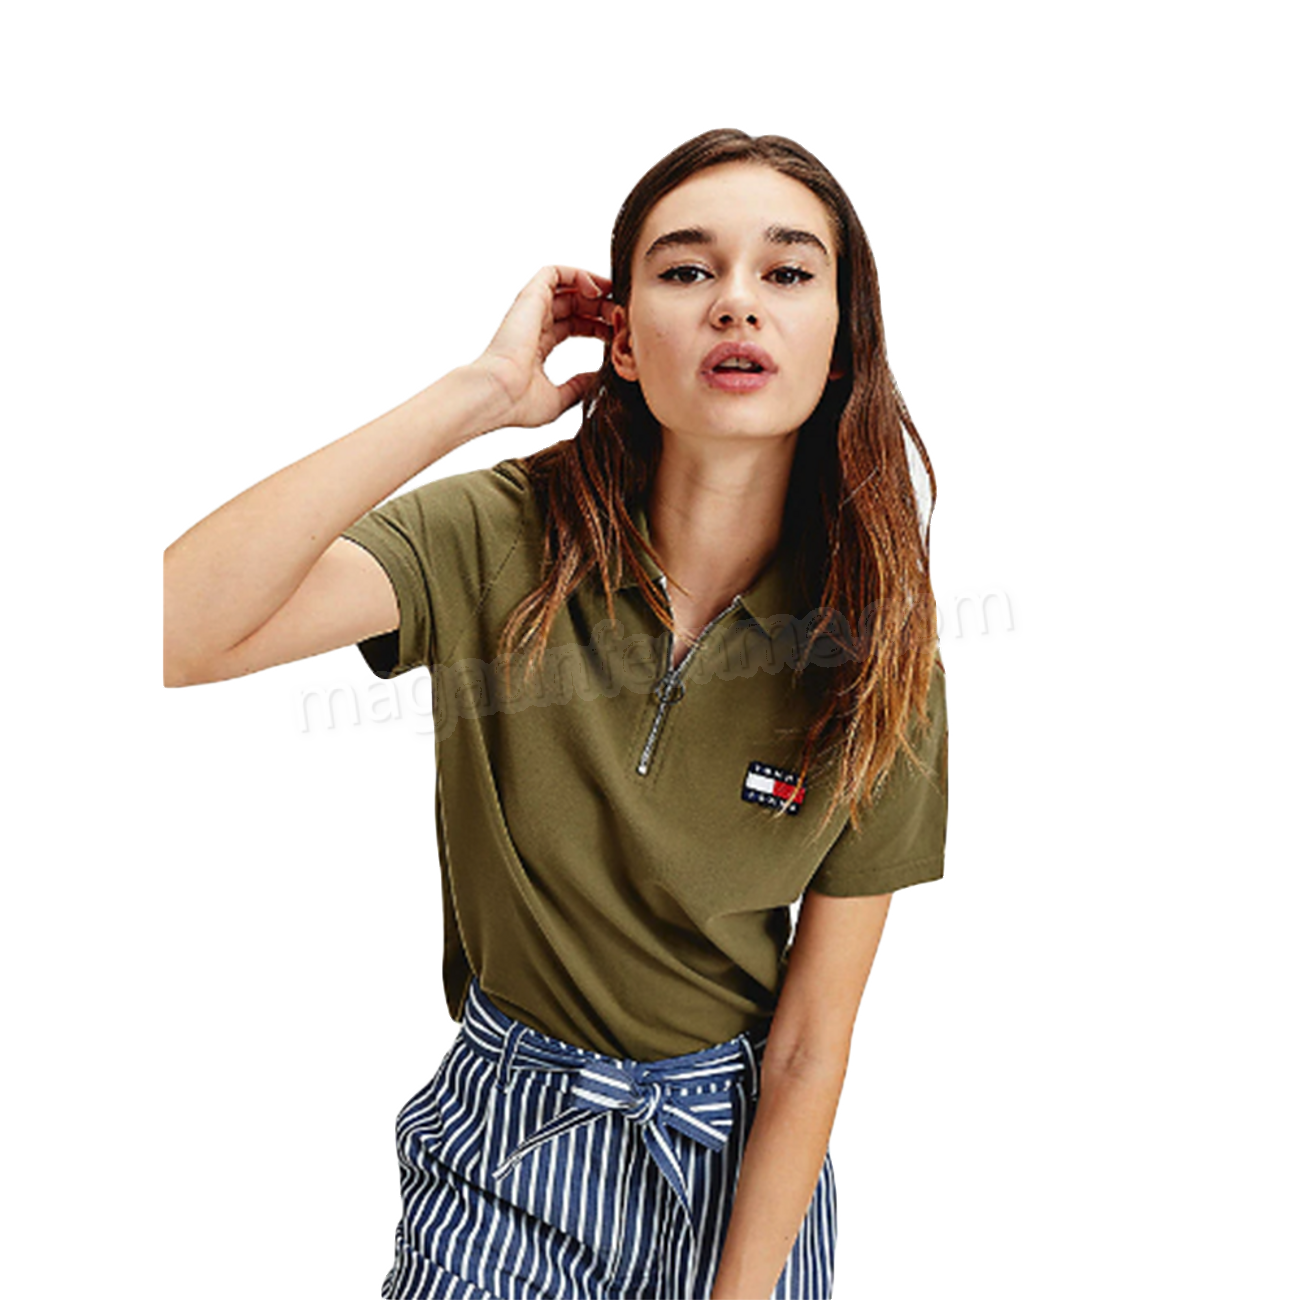 Tommy Jeans-Mode- Lifestyle femme TOMMY JEANS Tommy Jeans piqué badge Femme Kaki en solde - Tommy Jeans-Mode- Lifestyle femme TOMMY JEANS Tommy Jeans piqué badge Femme Kaki en solde